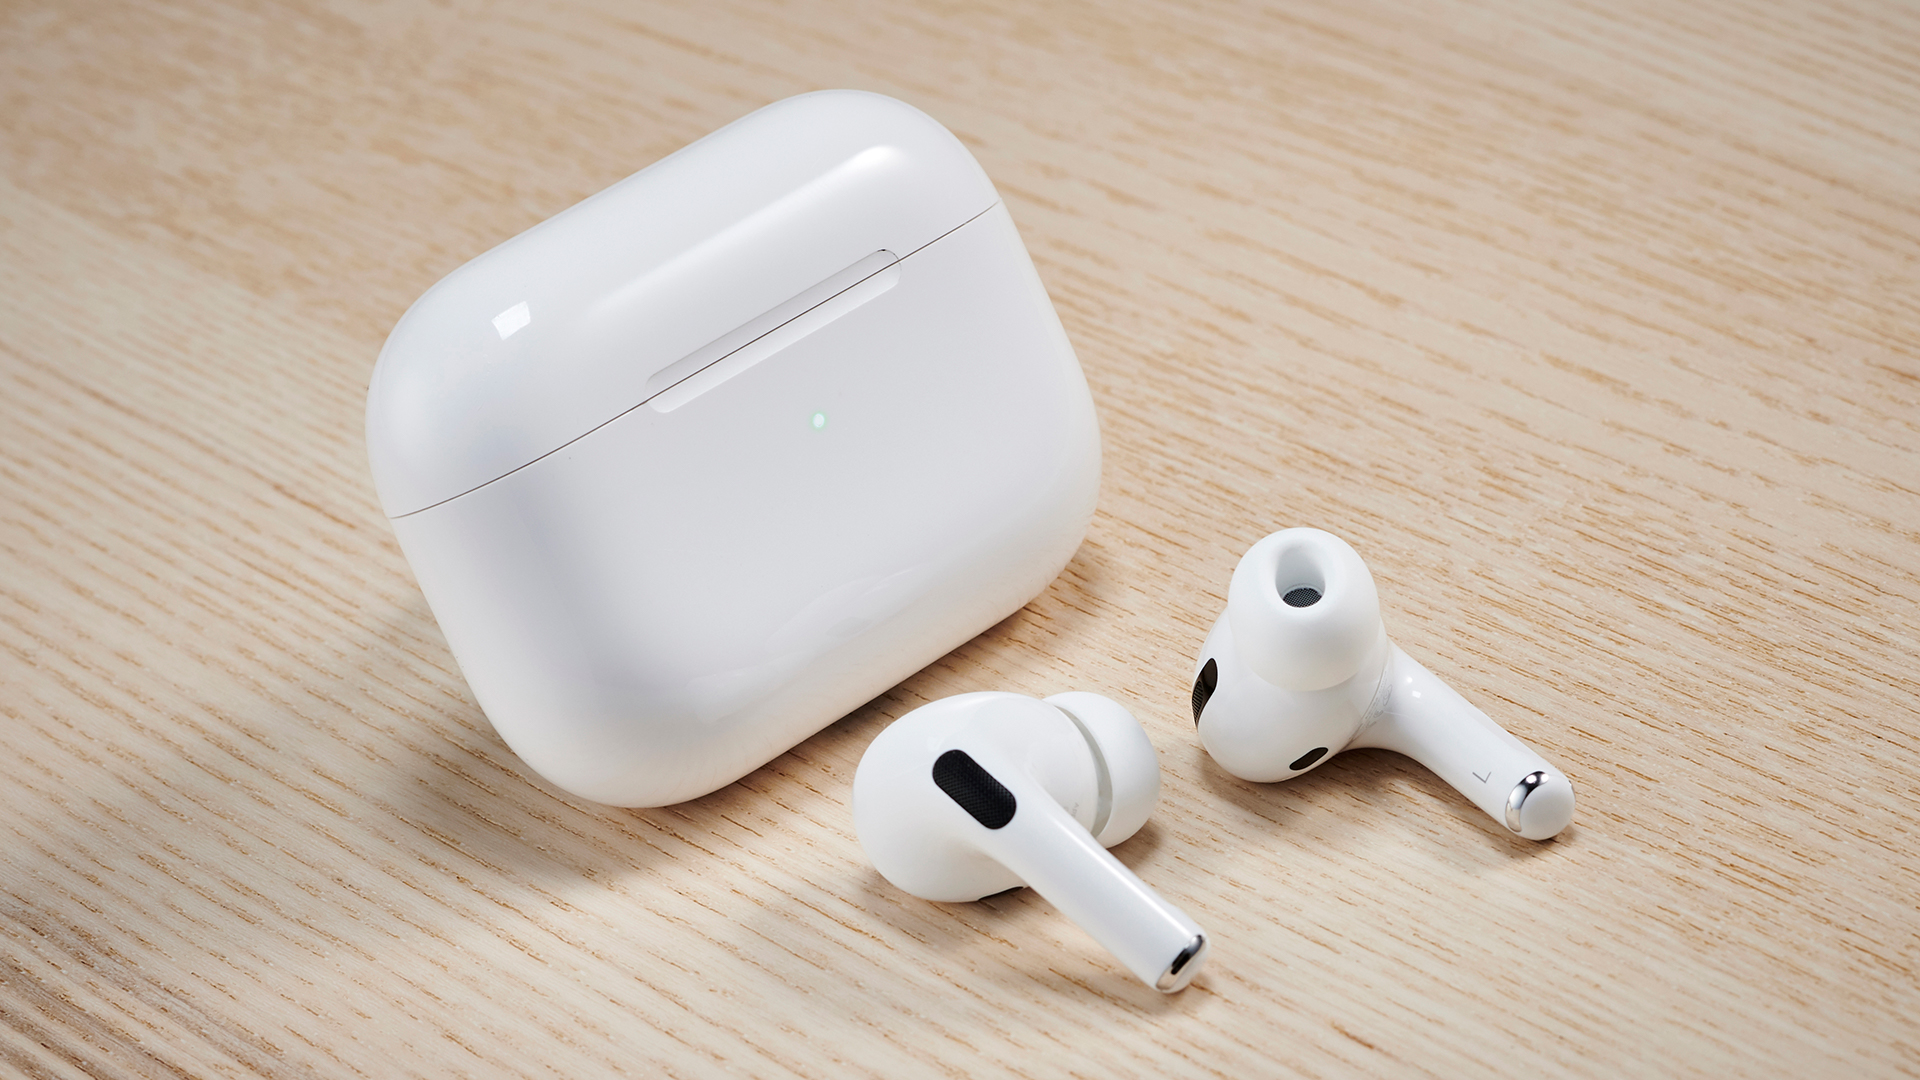 Apple AirPods Pro review: comfortable, clever earbuds with great sound | T3